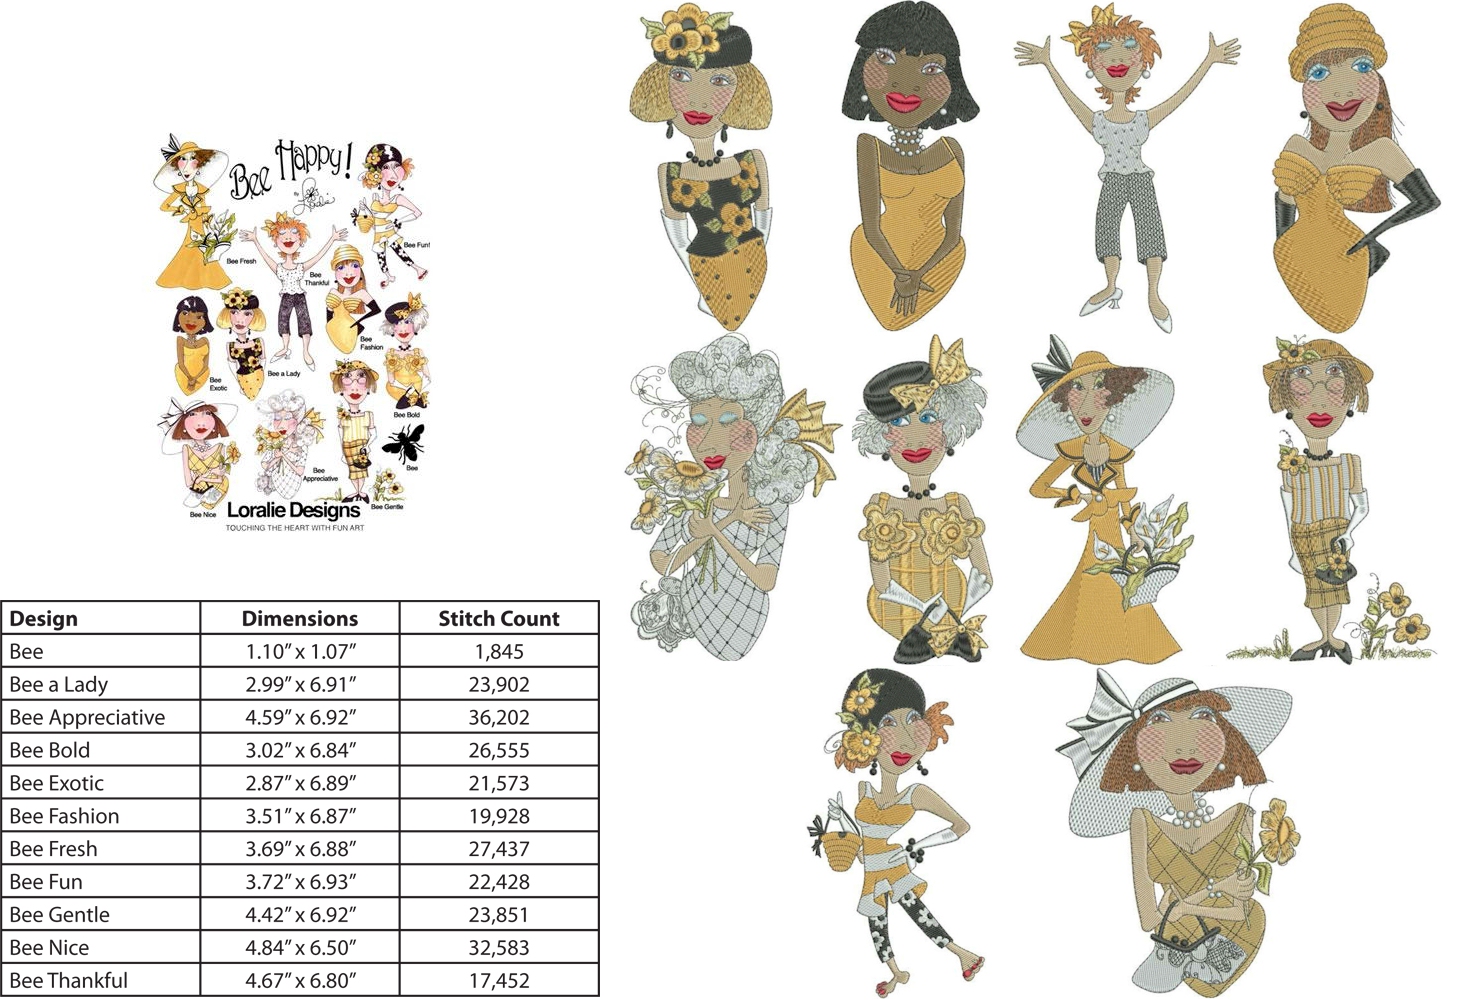 Bee Happy by Loralie Designs Embroidery Designs on a Multi-Format CD-ROM 630-118